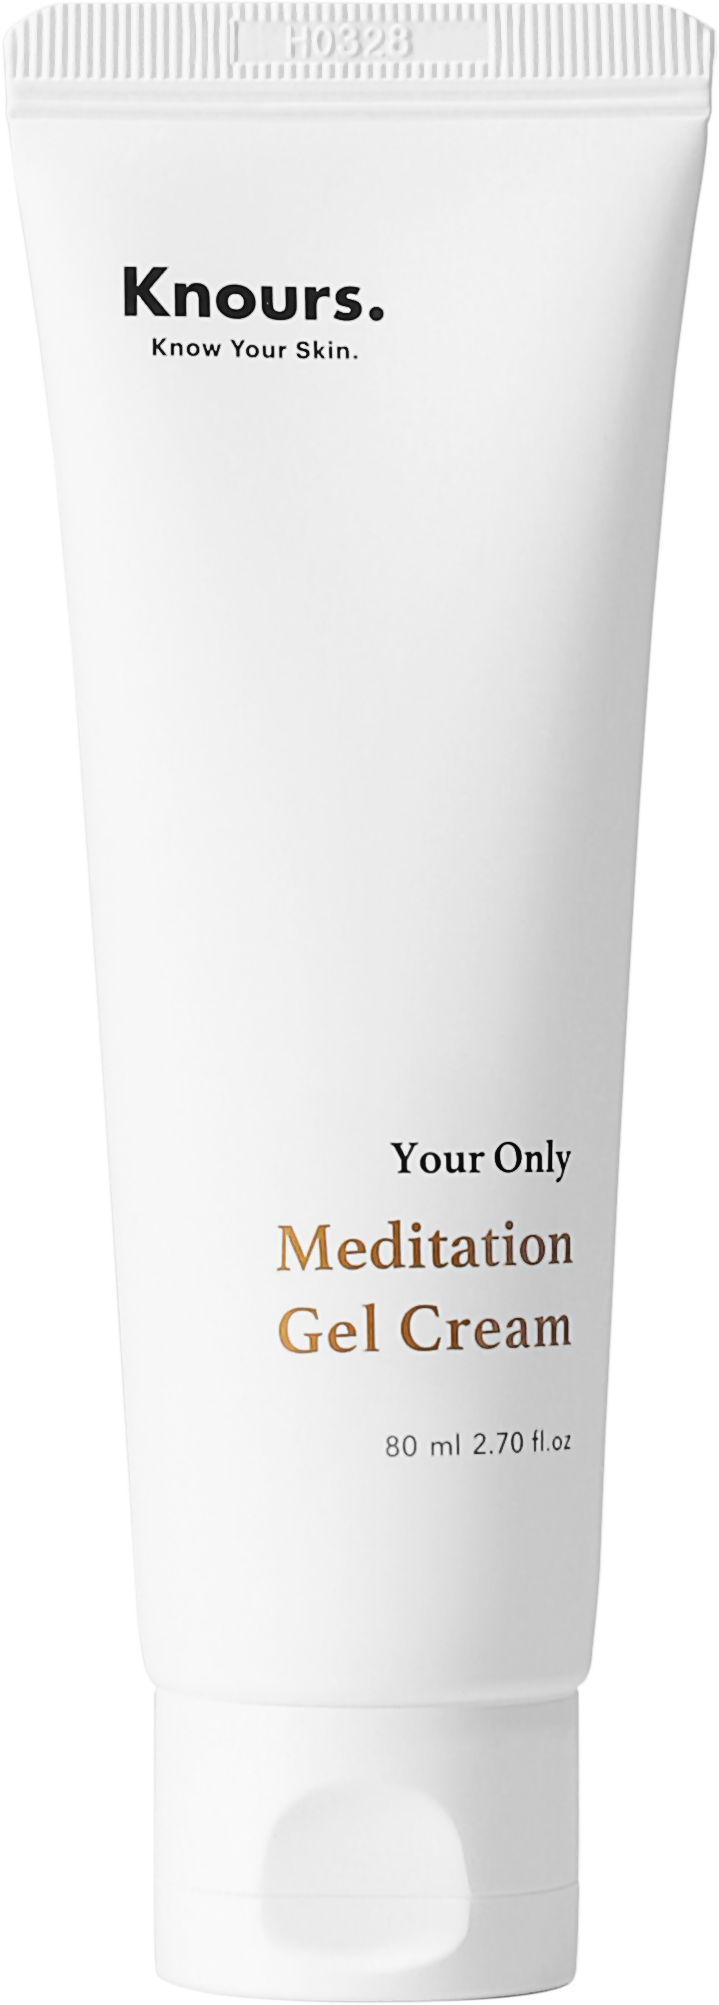 Knours Your Only Meditation Gel Cream